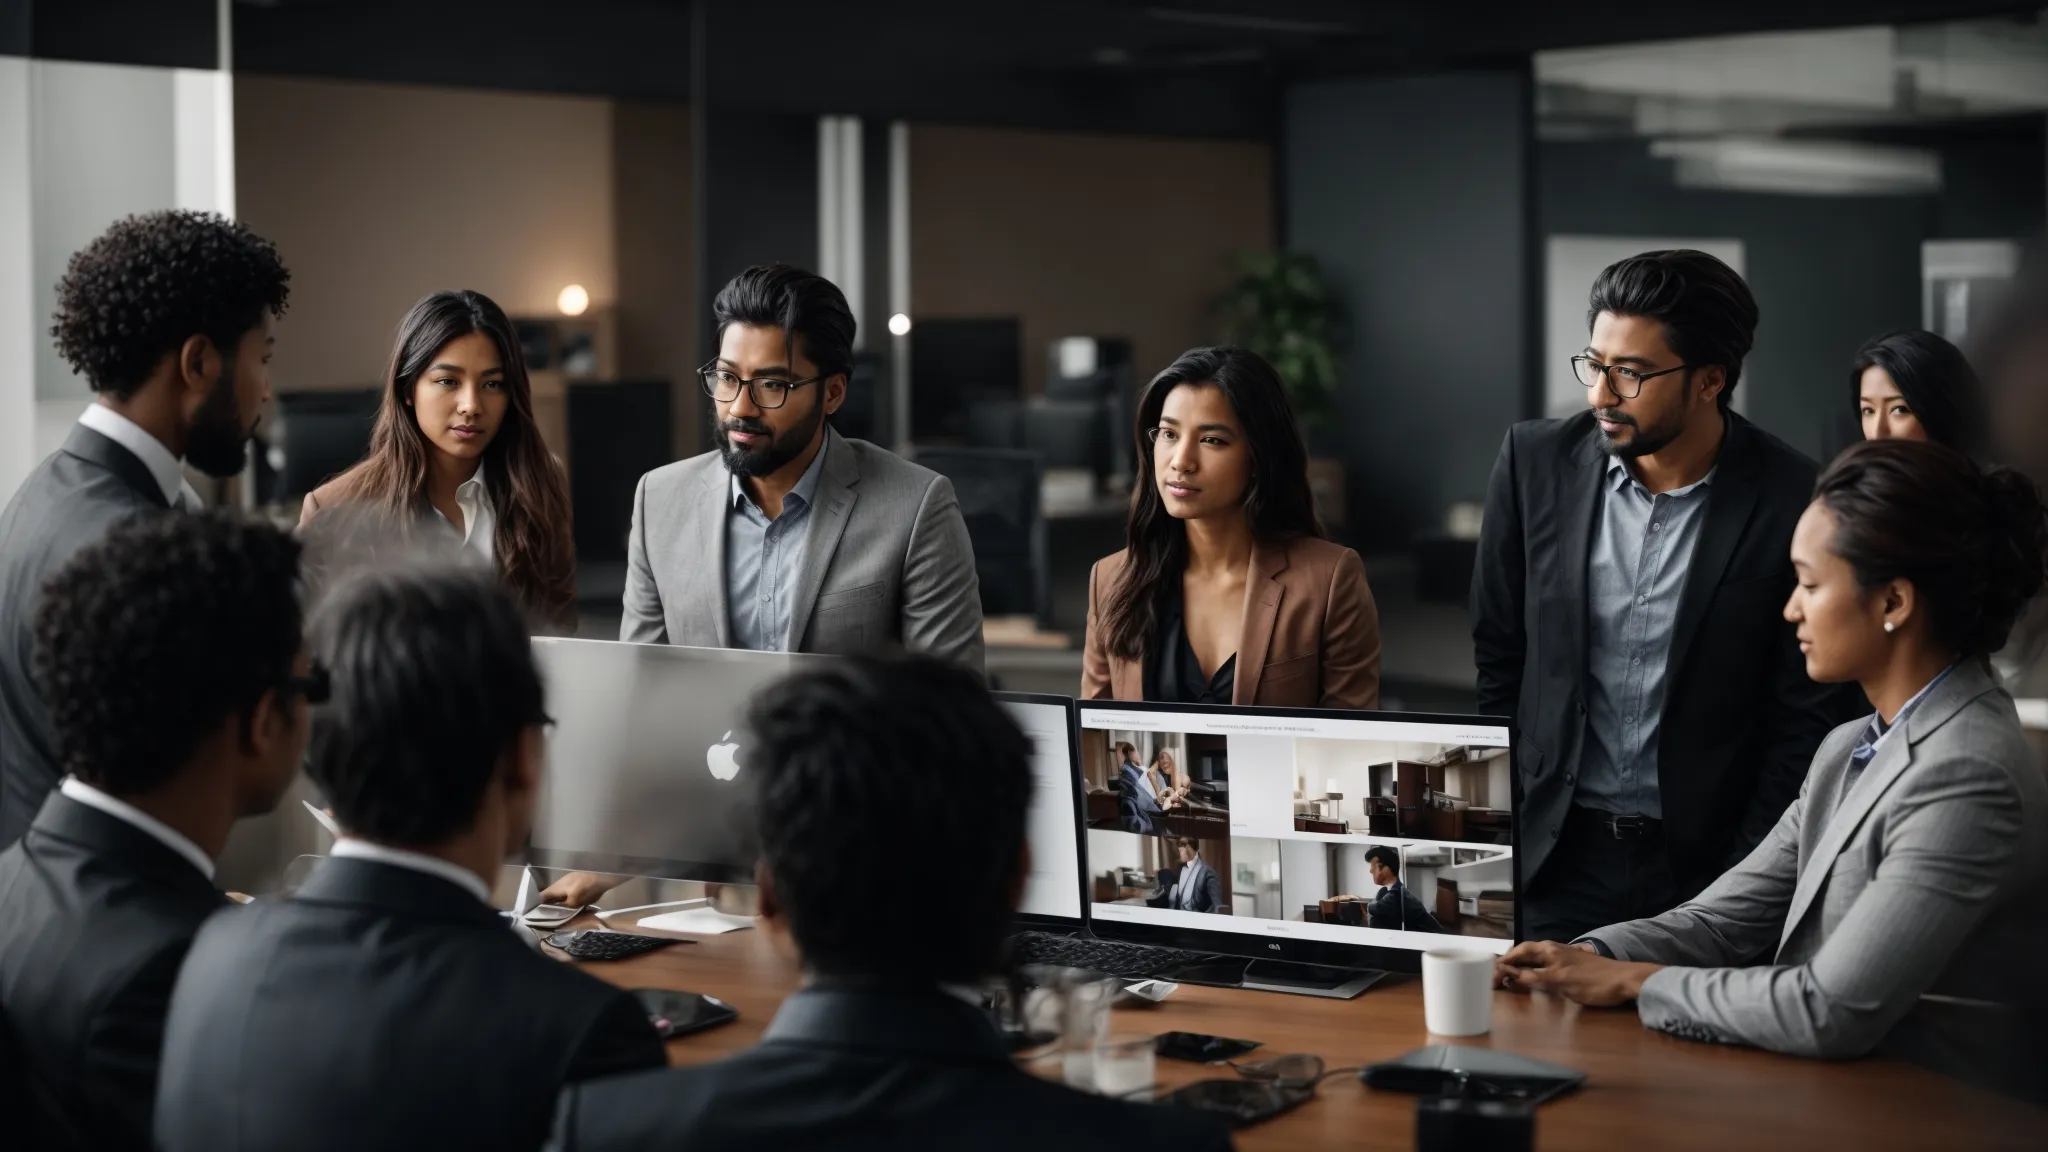 a diverse group of international professionals discussing around a website interface on a large monitor in a modern office.